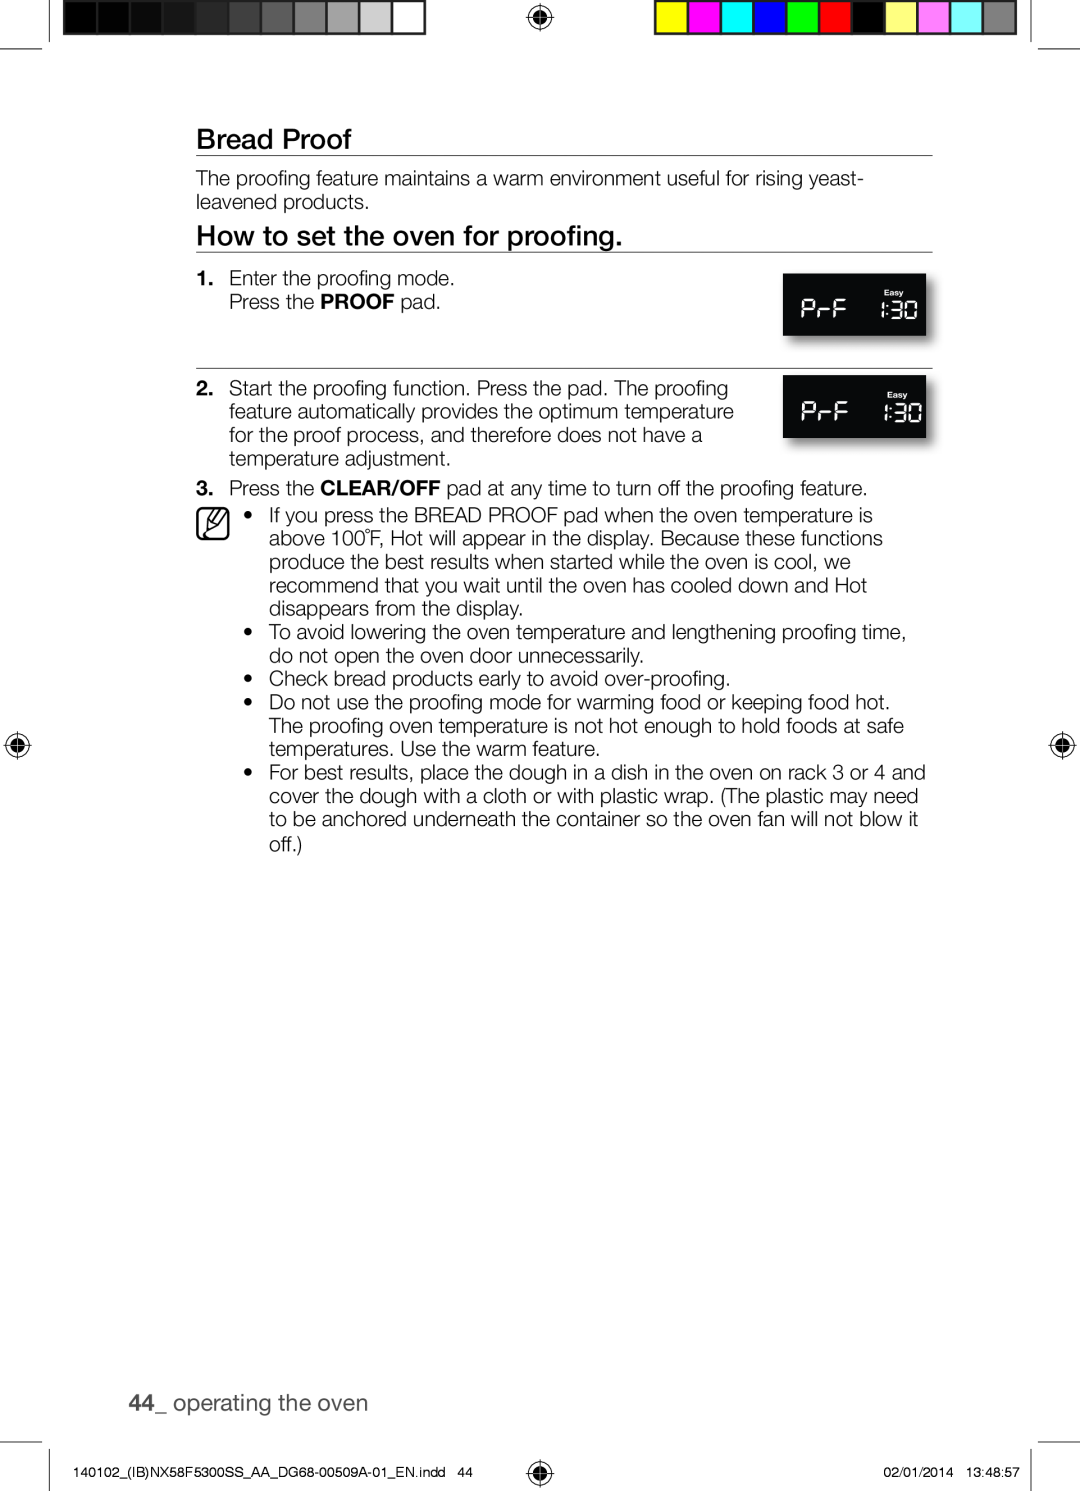 Samsung NX58F5500SW user manual Bread Proof, How to set the oven for proofing, operating the oven 